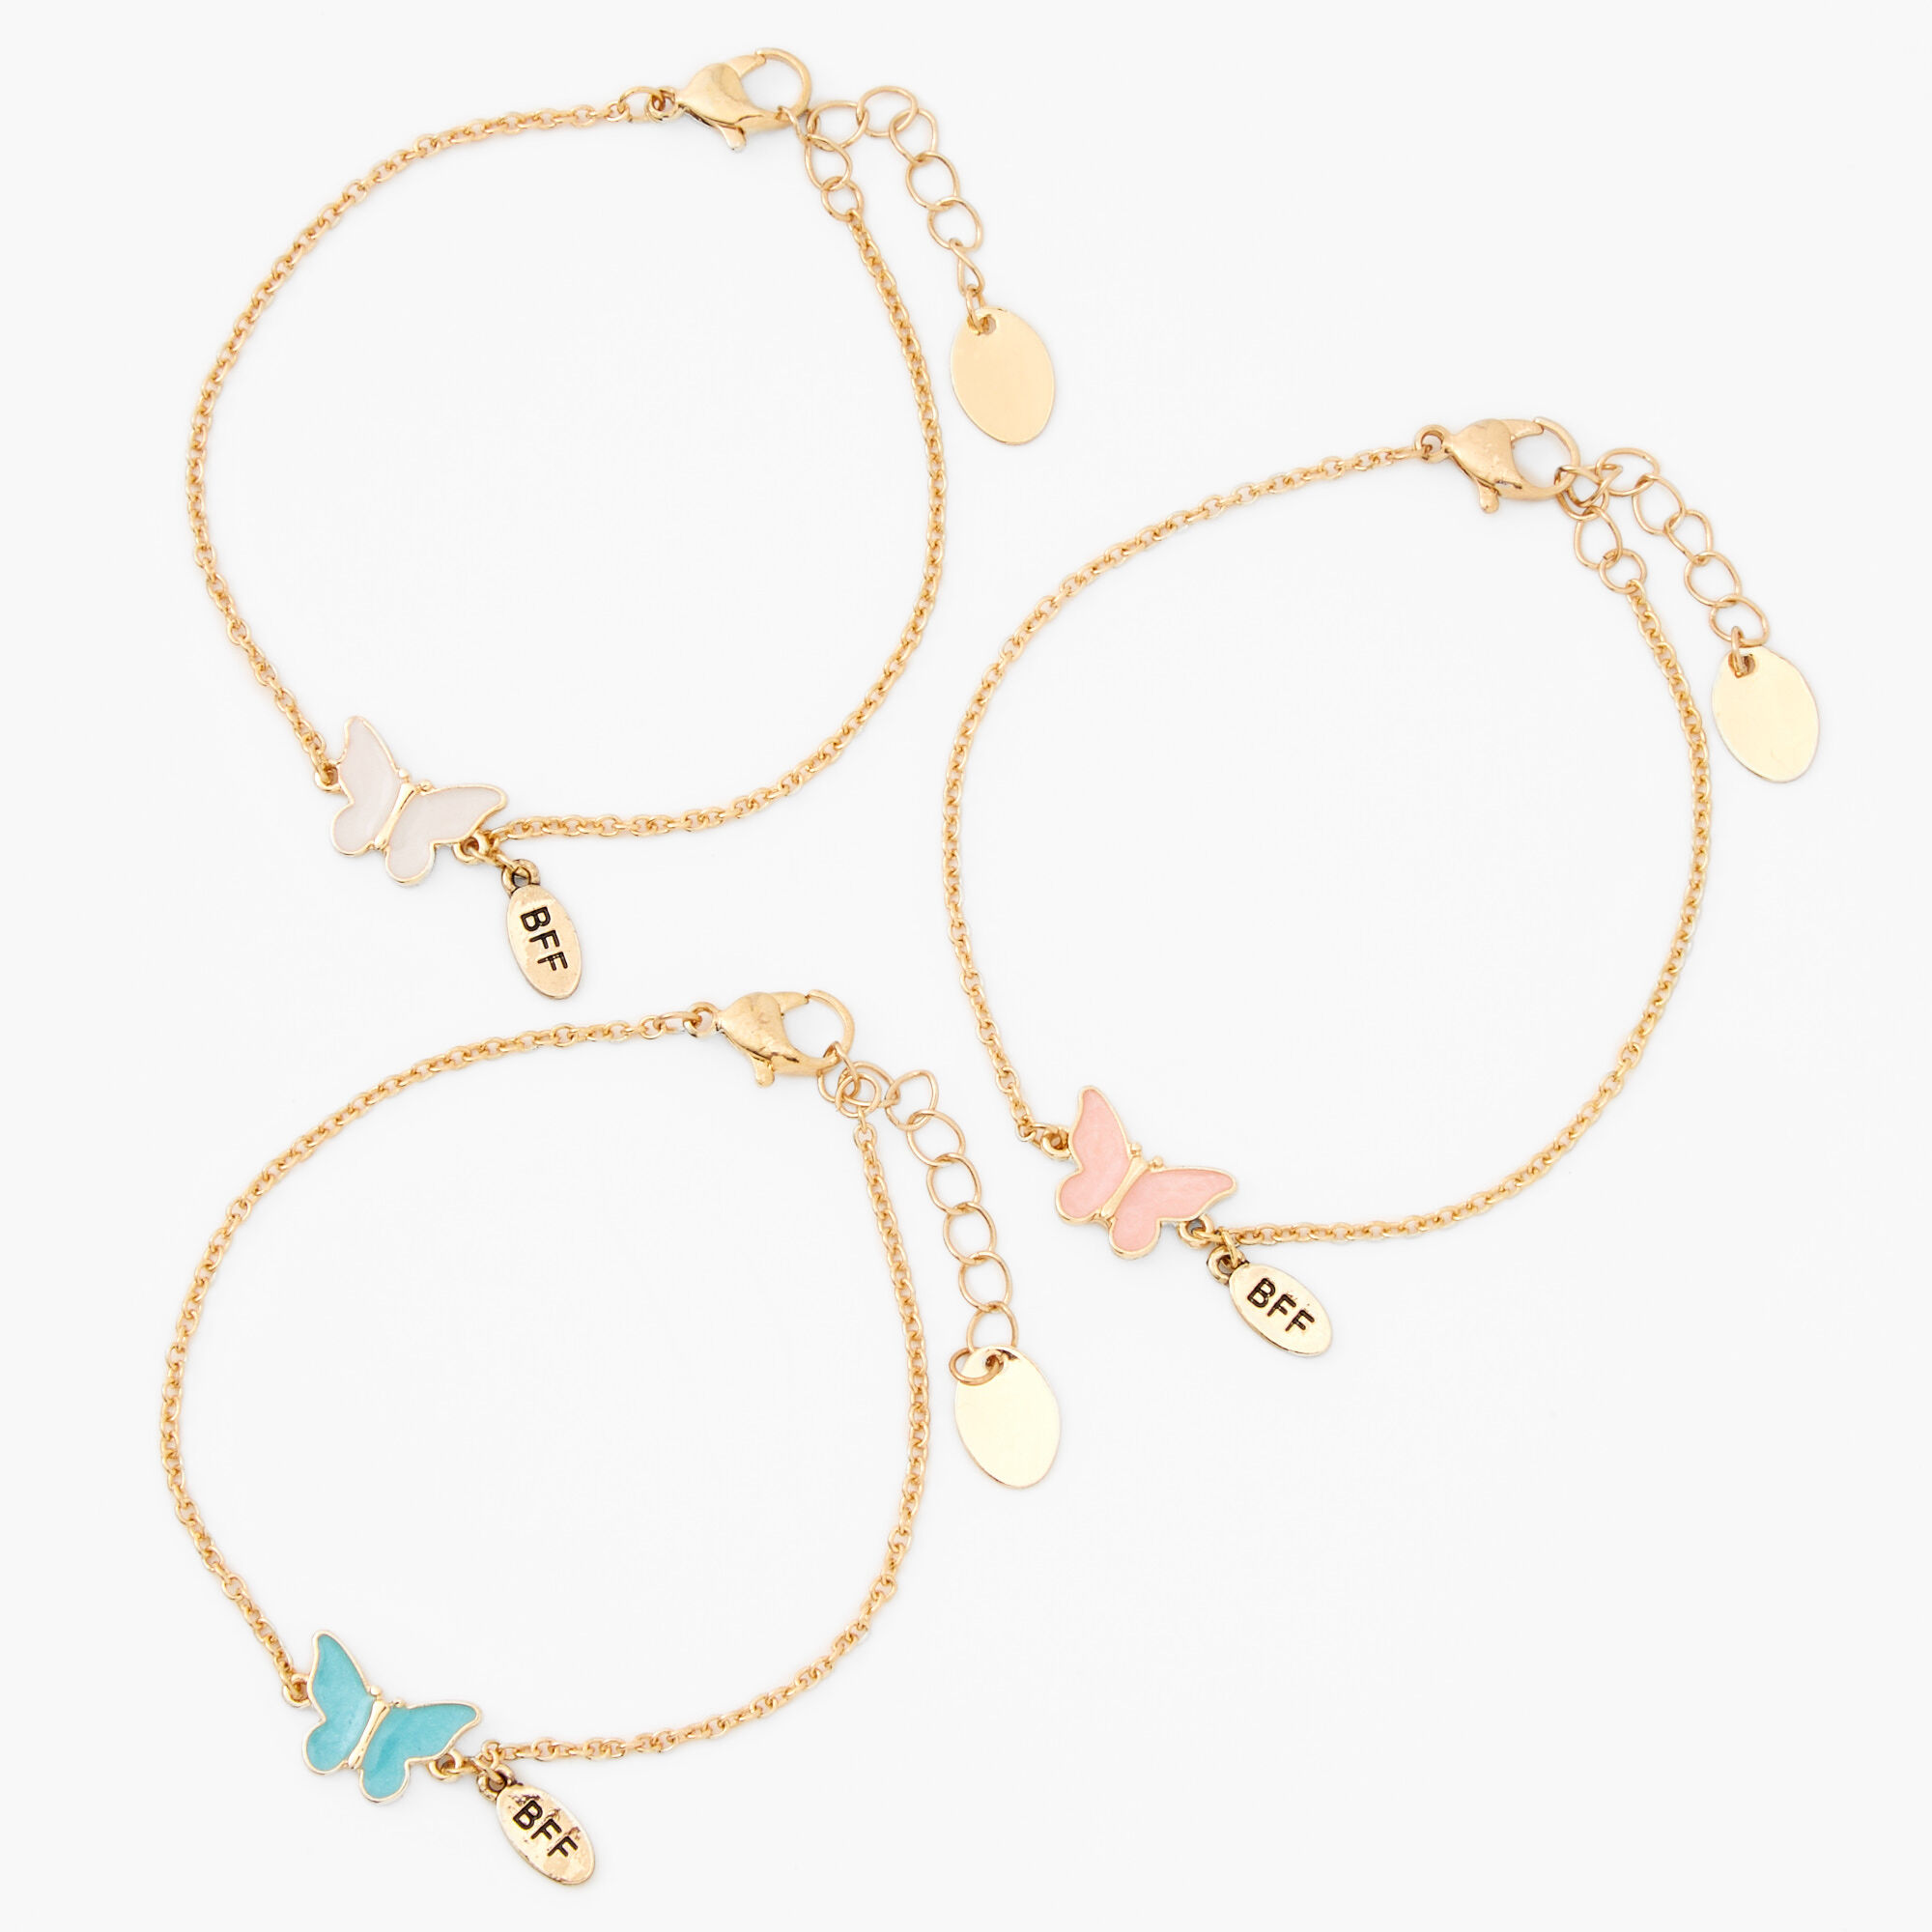 View Claires Tone Butterfly Chain Bracelets 3 Pack Gold information